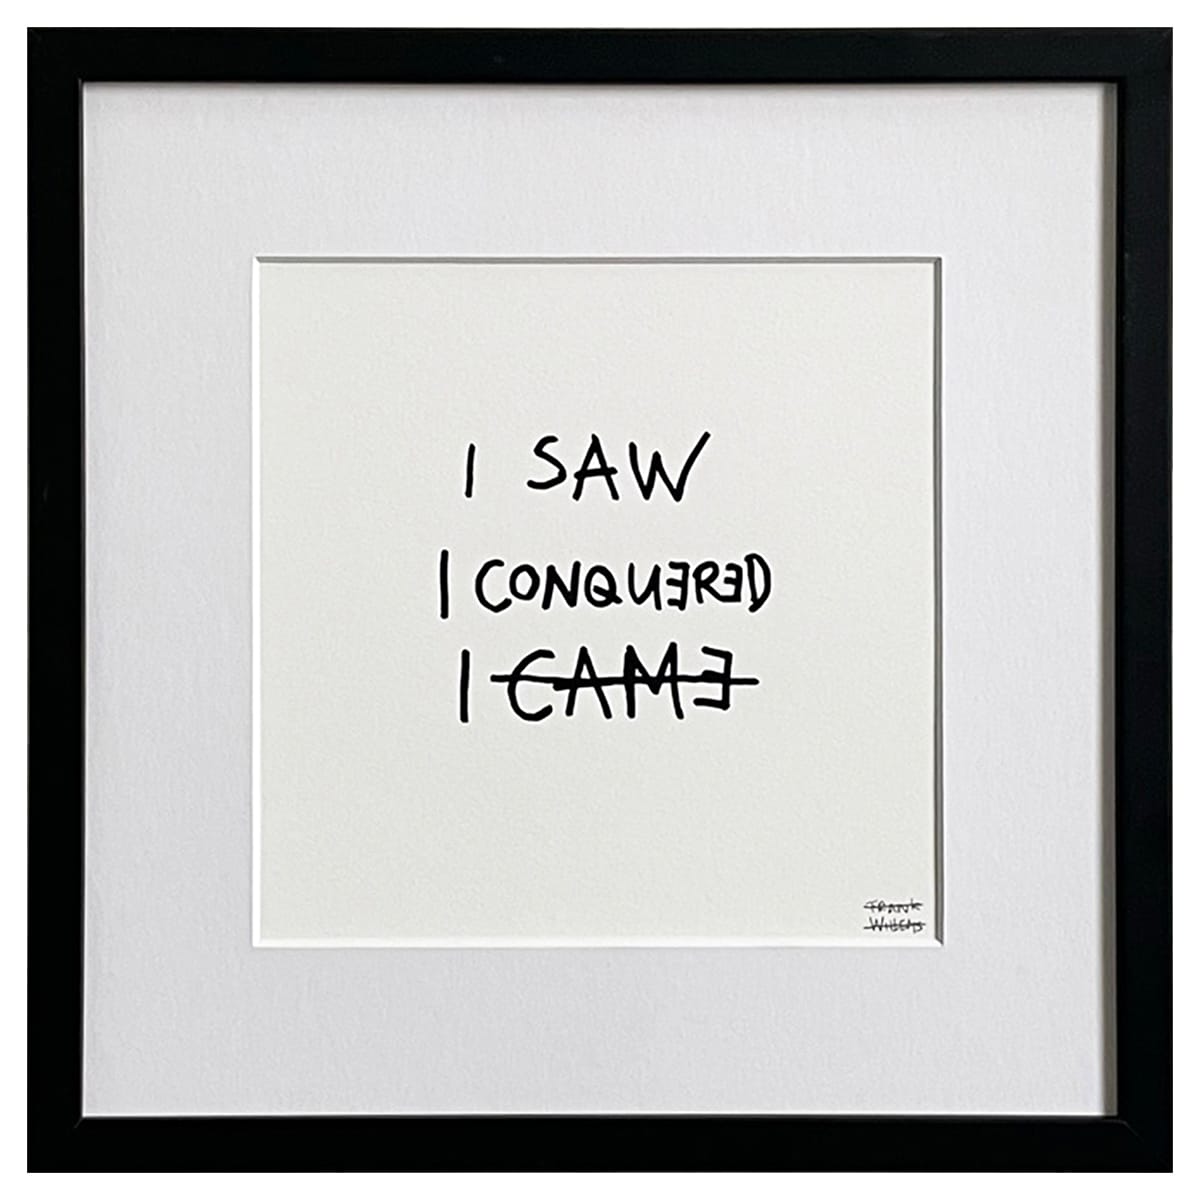 Limited Edt Text Prints - I SAW, I CONQUERED, I CAME - Frank Willems